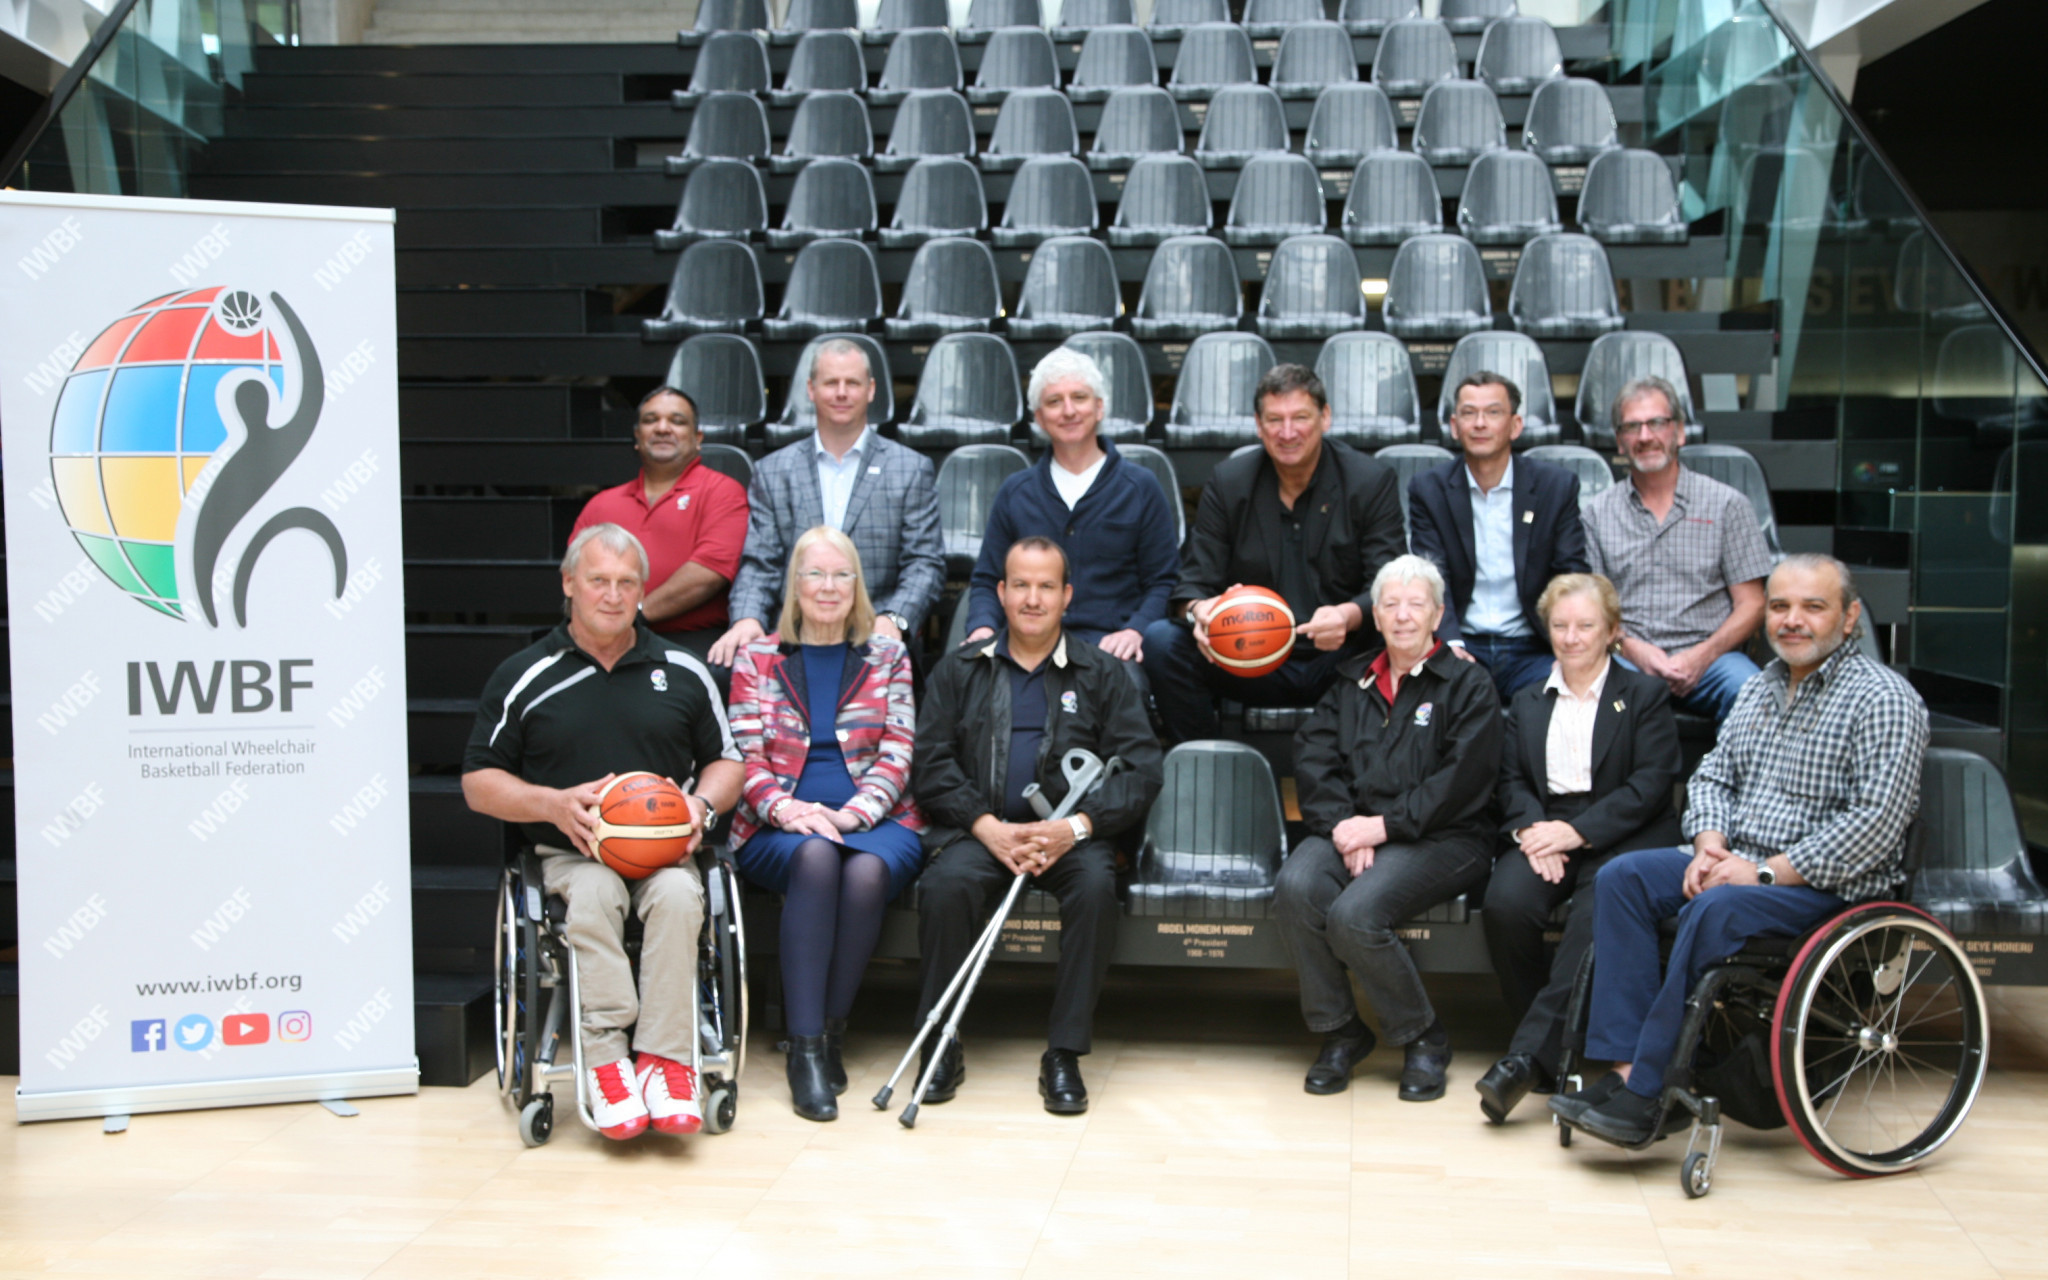 Molten was named as the global partner and official ball partner of the IWBF in April 2018 ©IWBF